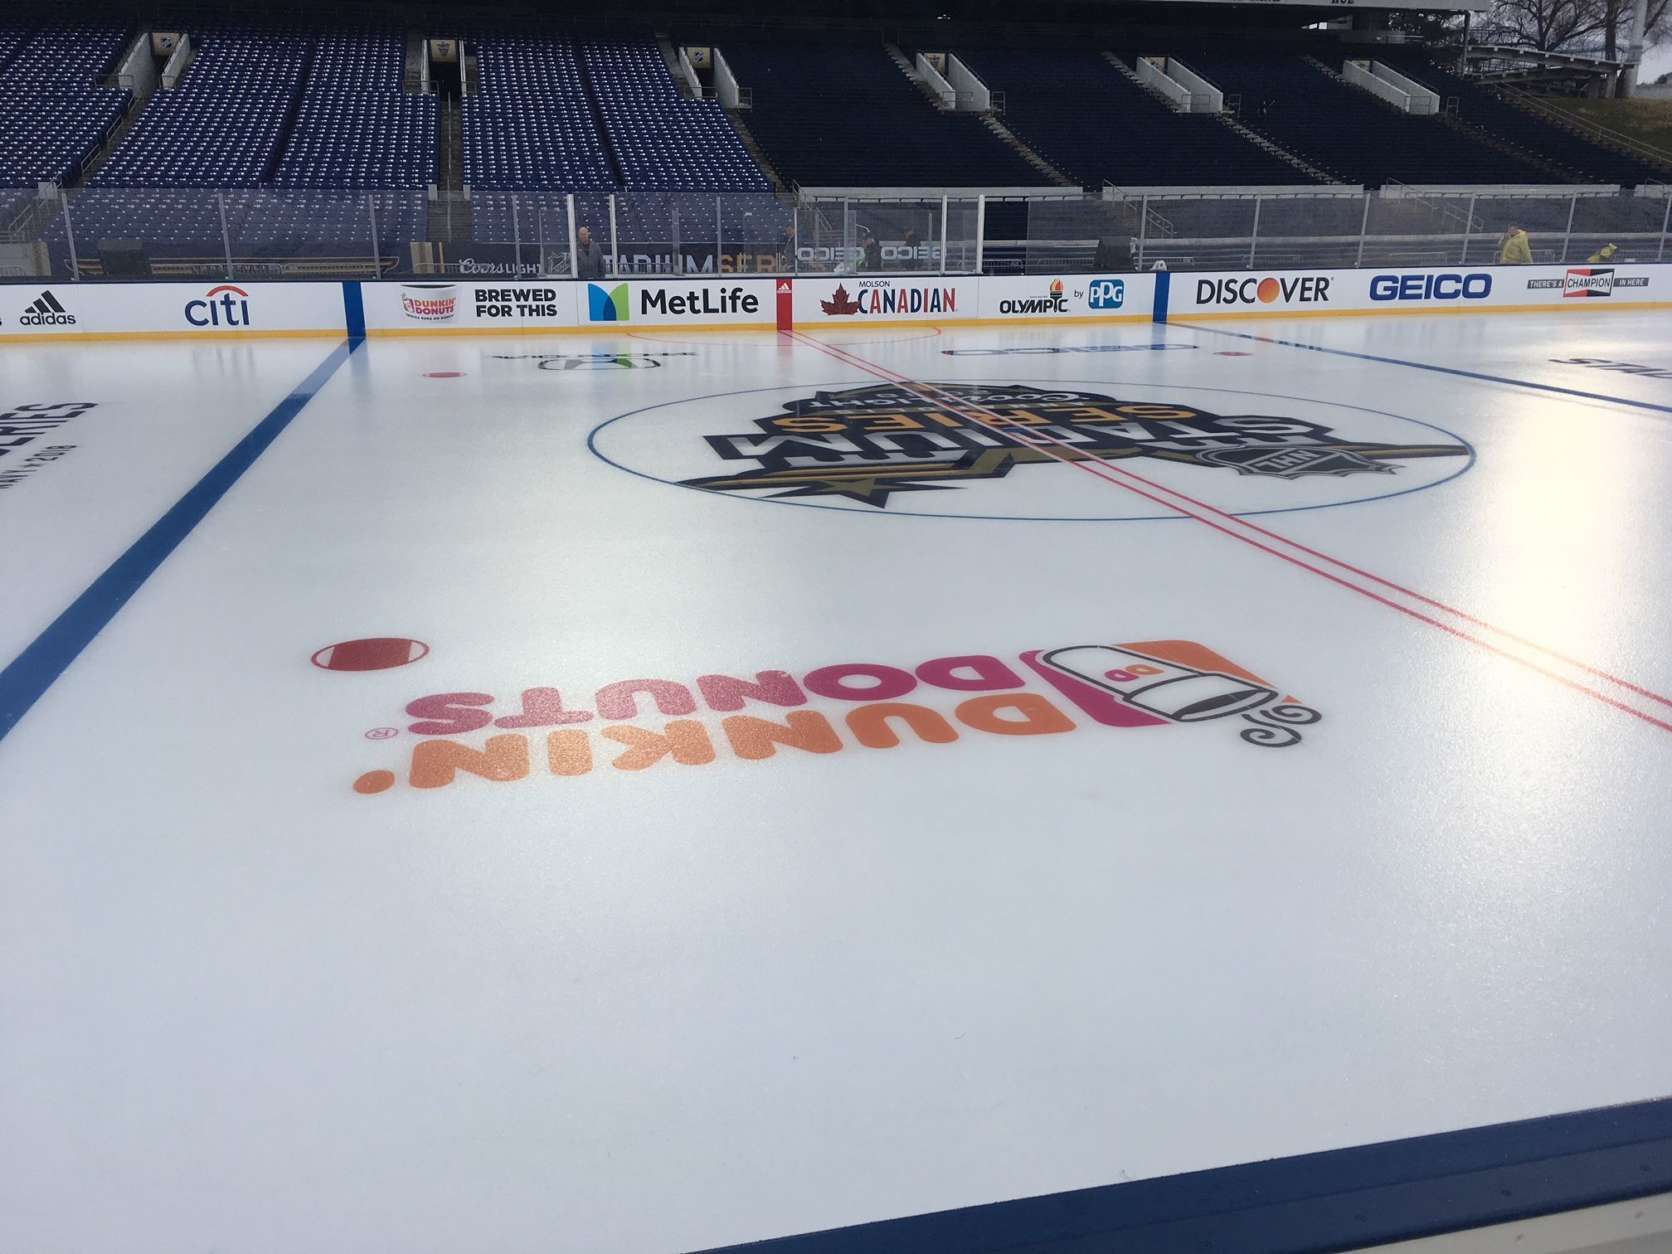 The view from the Toronto Maple Leafs bench at ice level. (WTOP/Noah Frank)